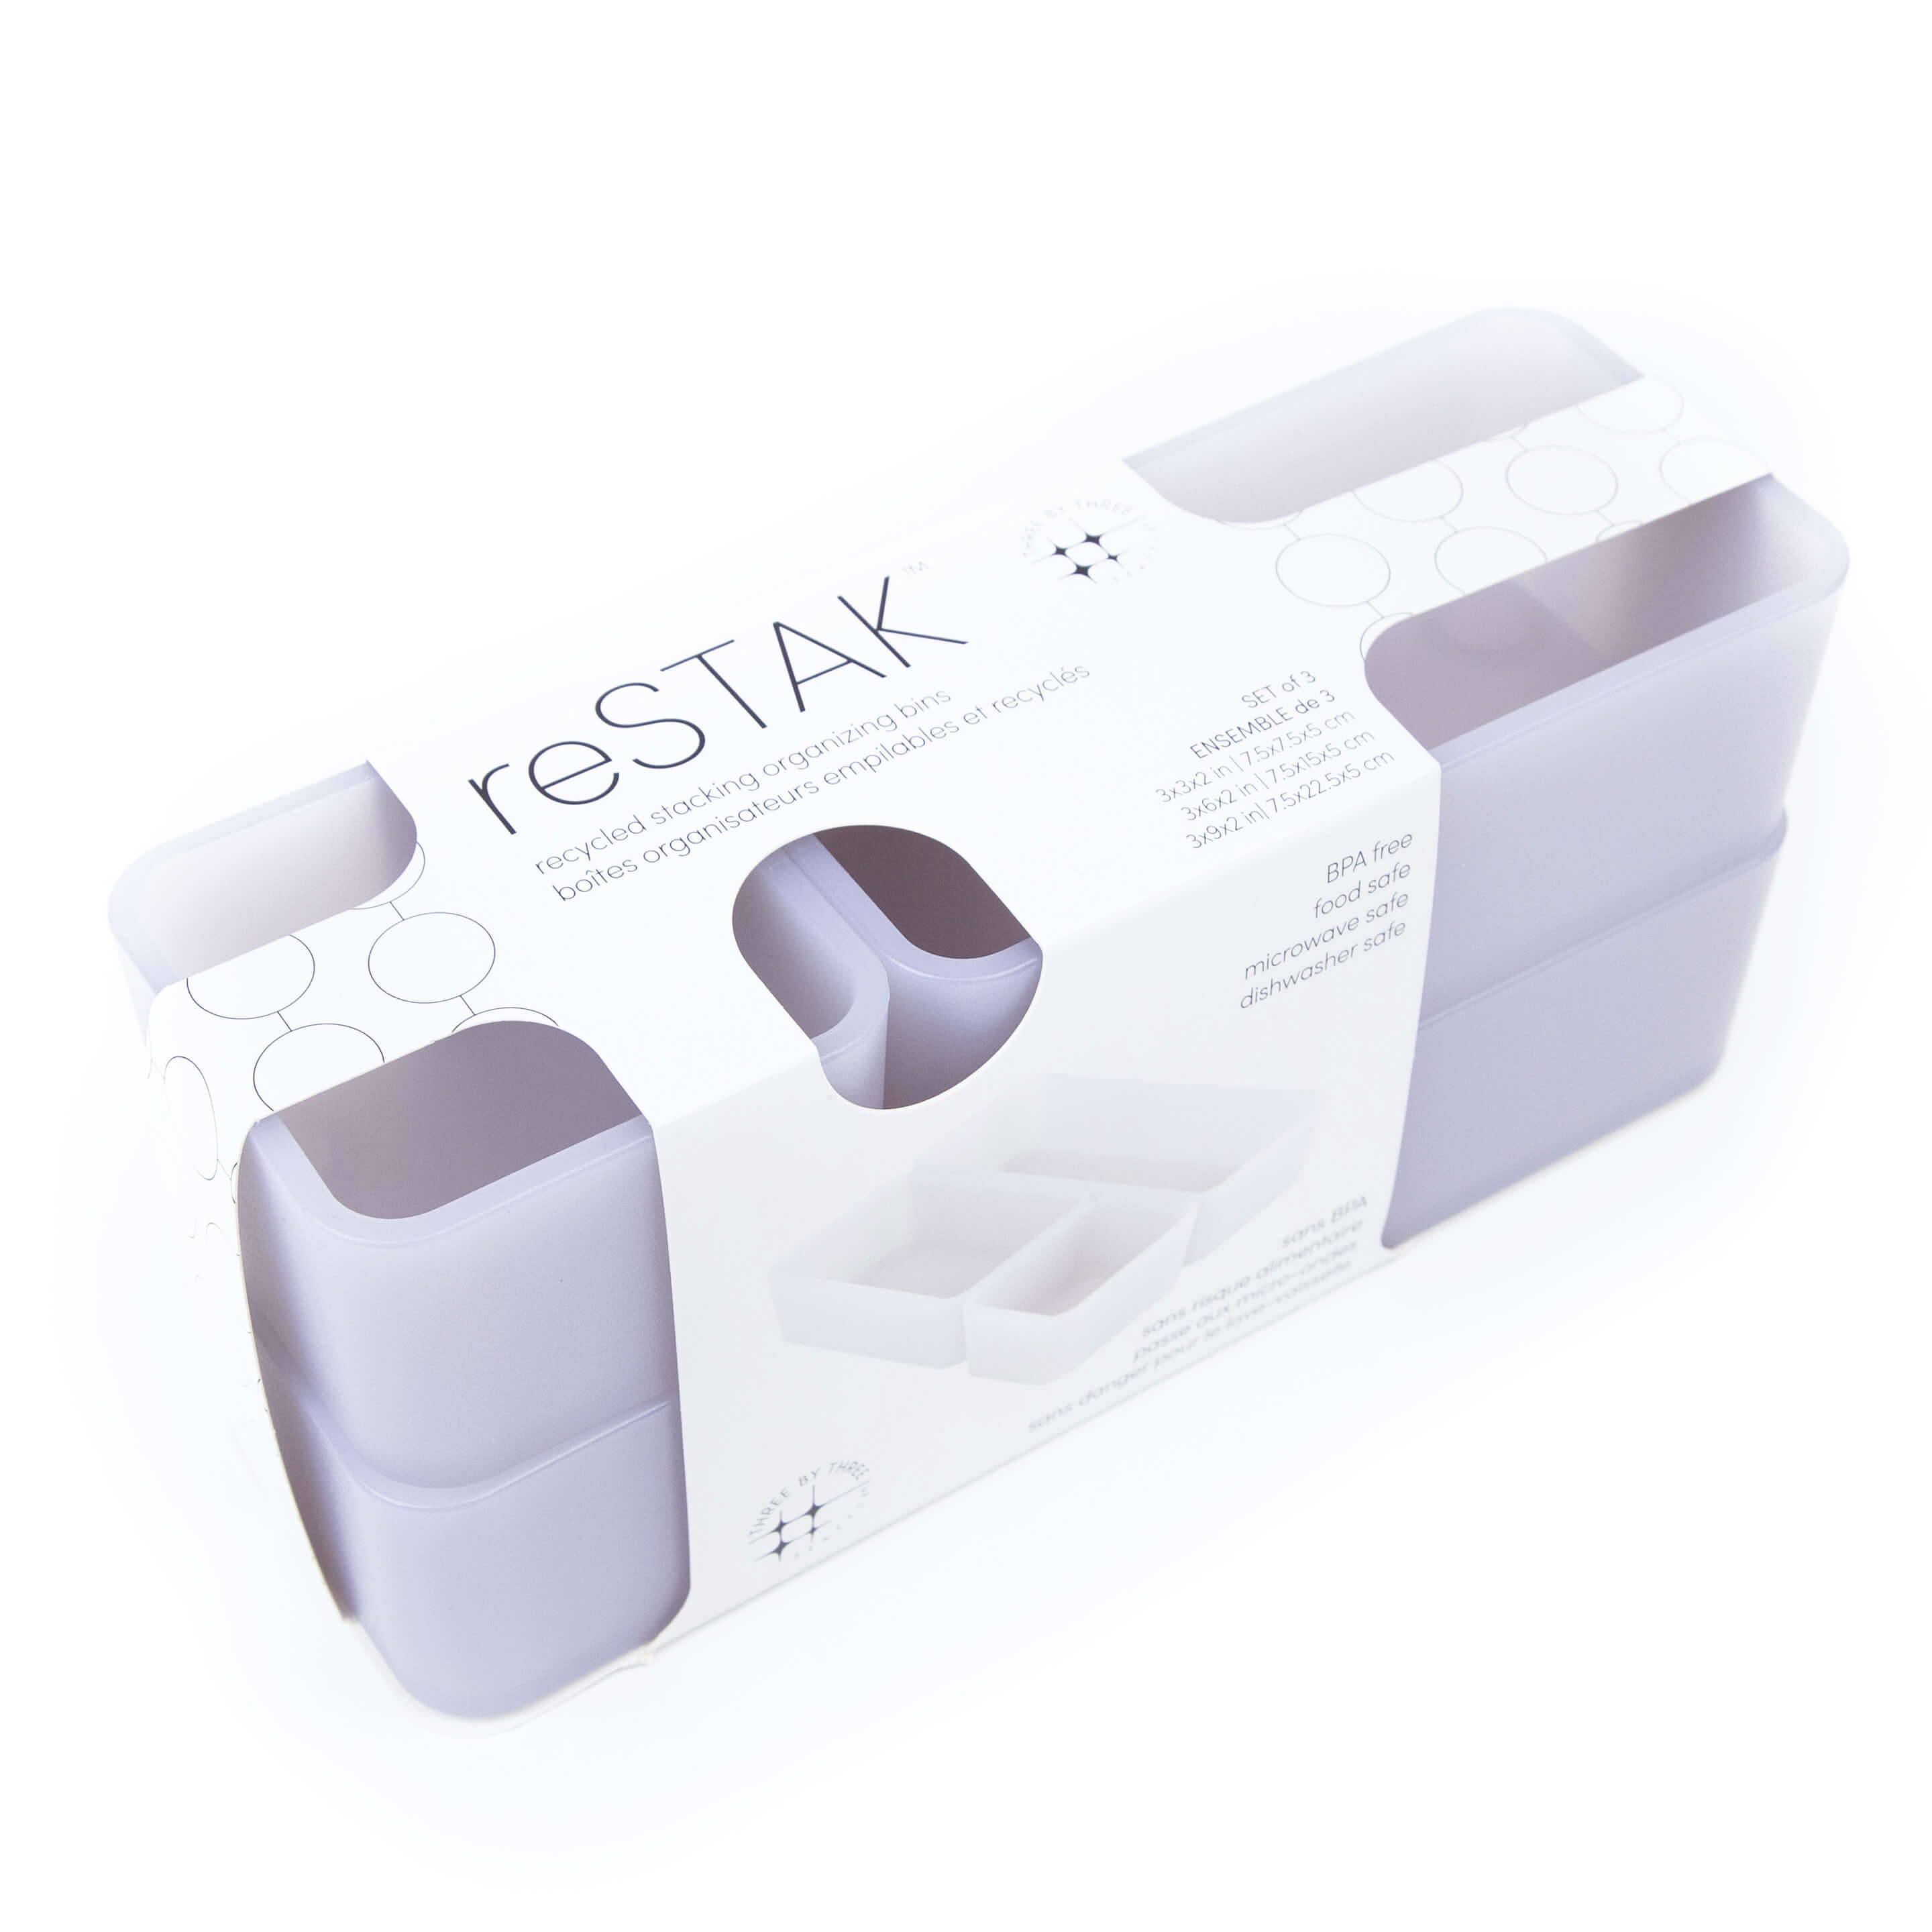 reSTAK recycled stackable organizing bins set of 3